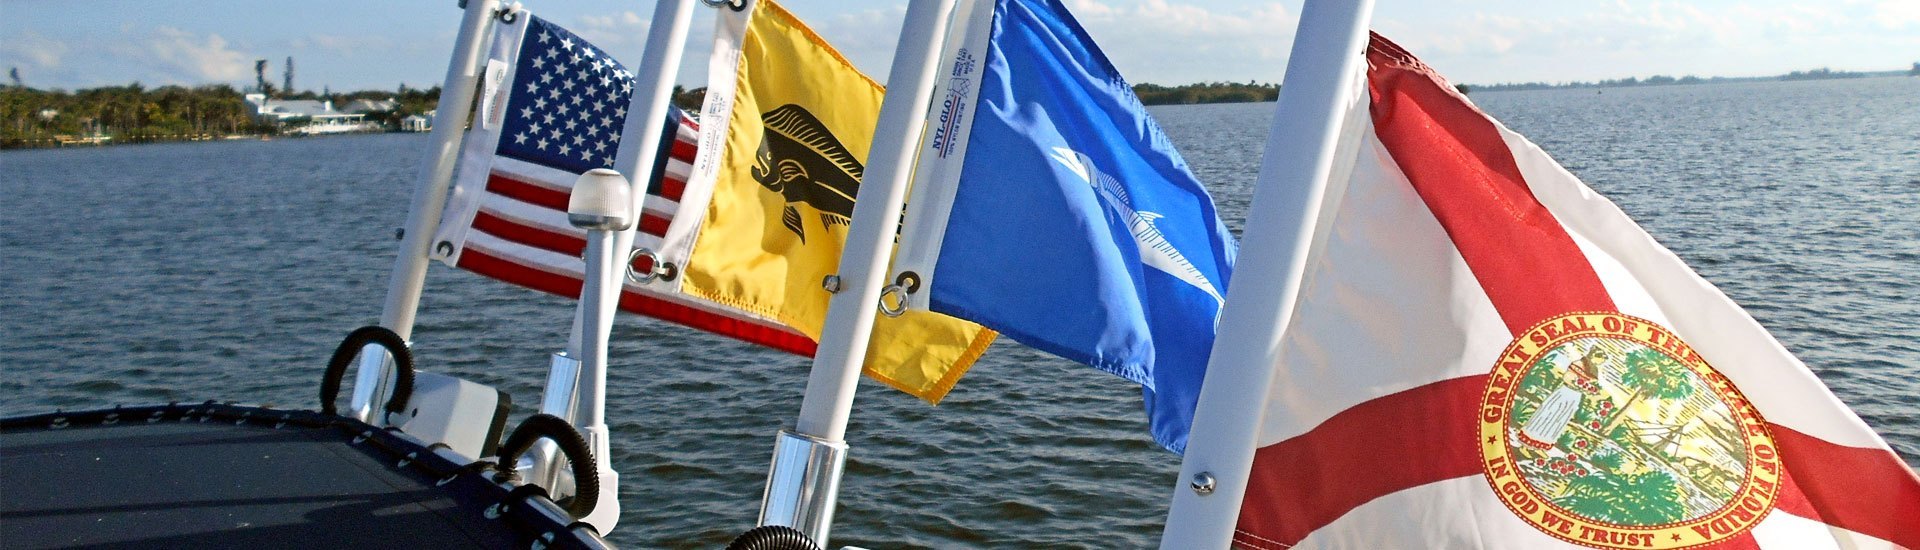 Nautical Flags: Essential Guide for Maritime Communication